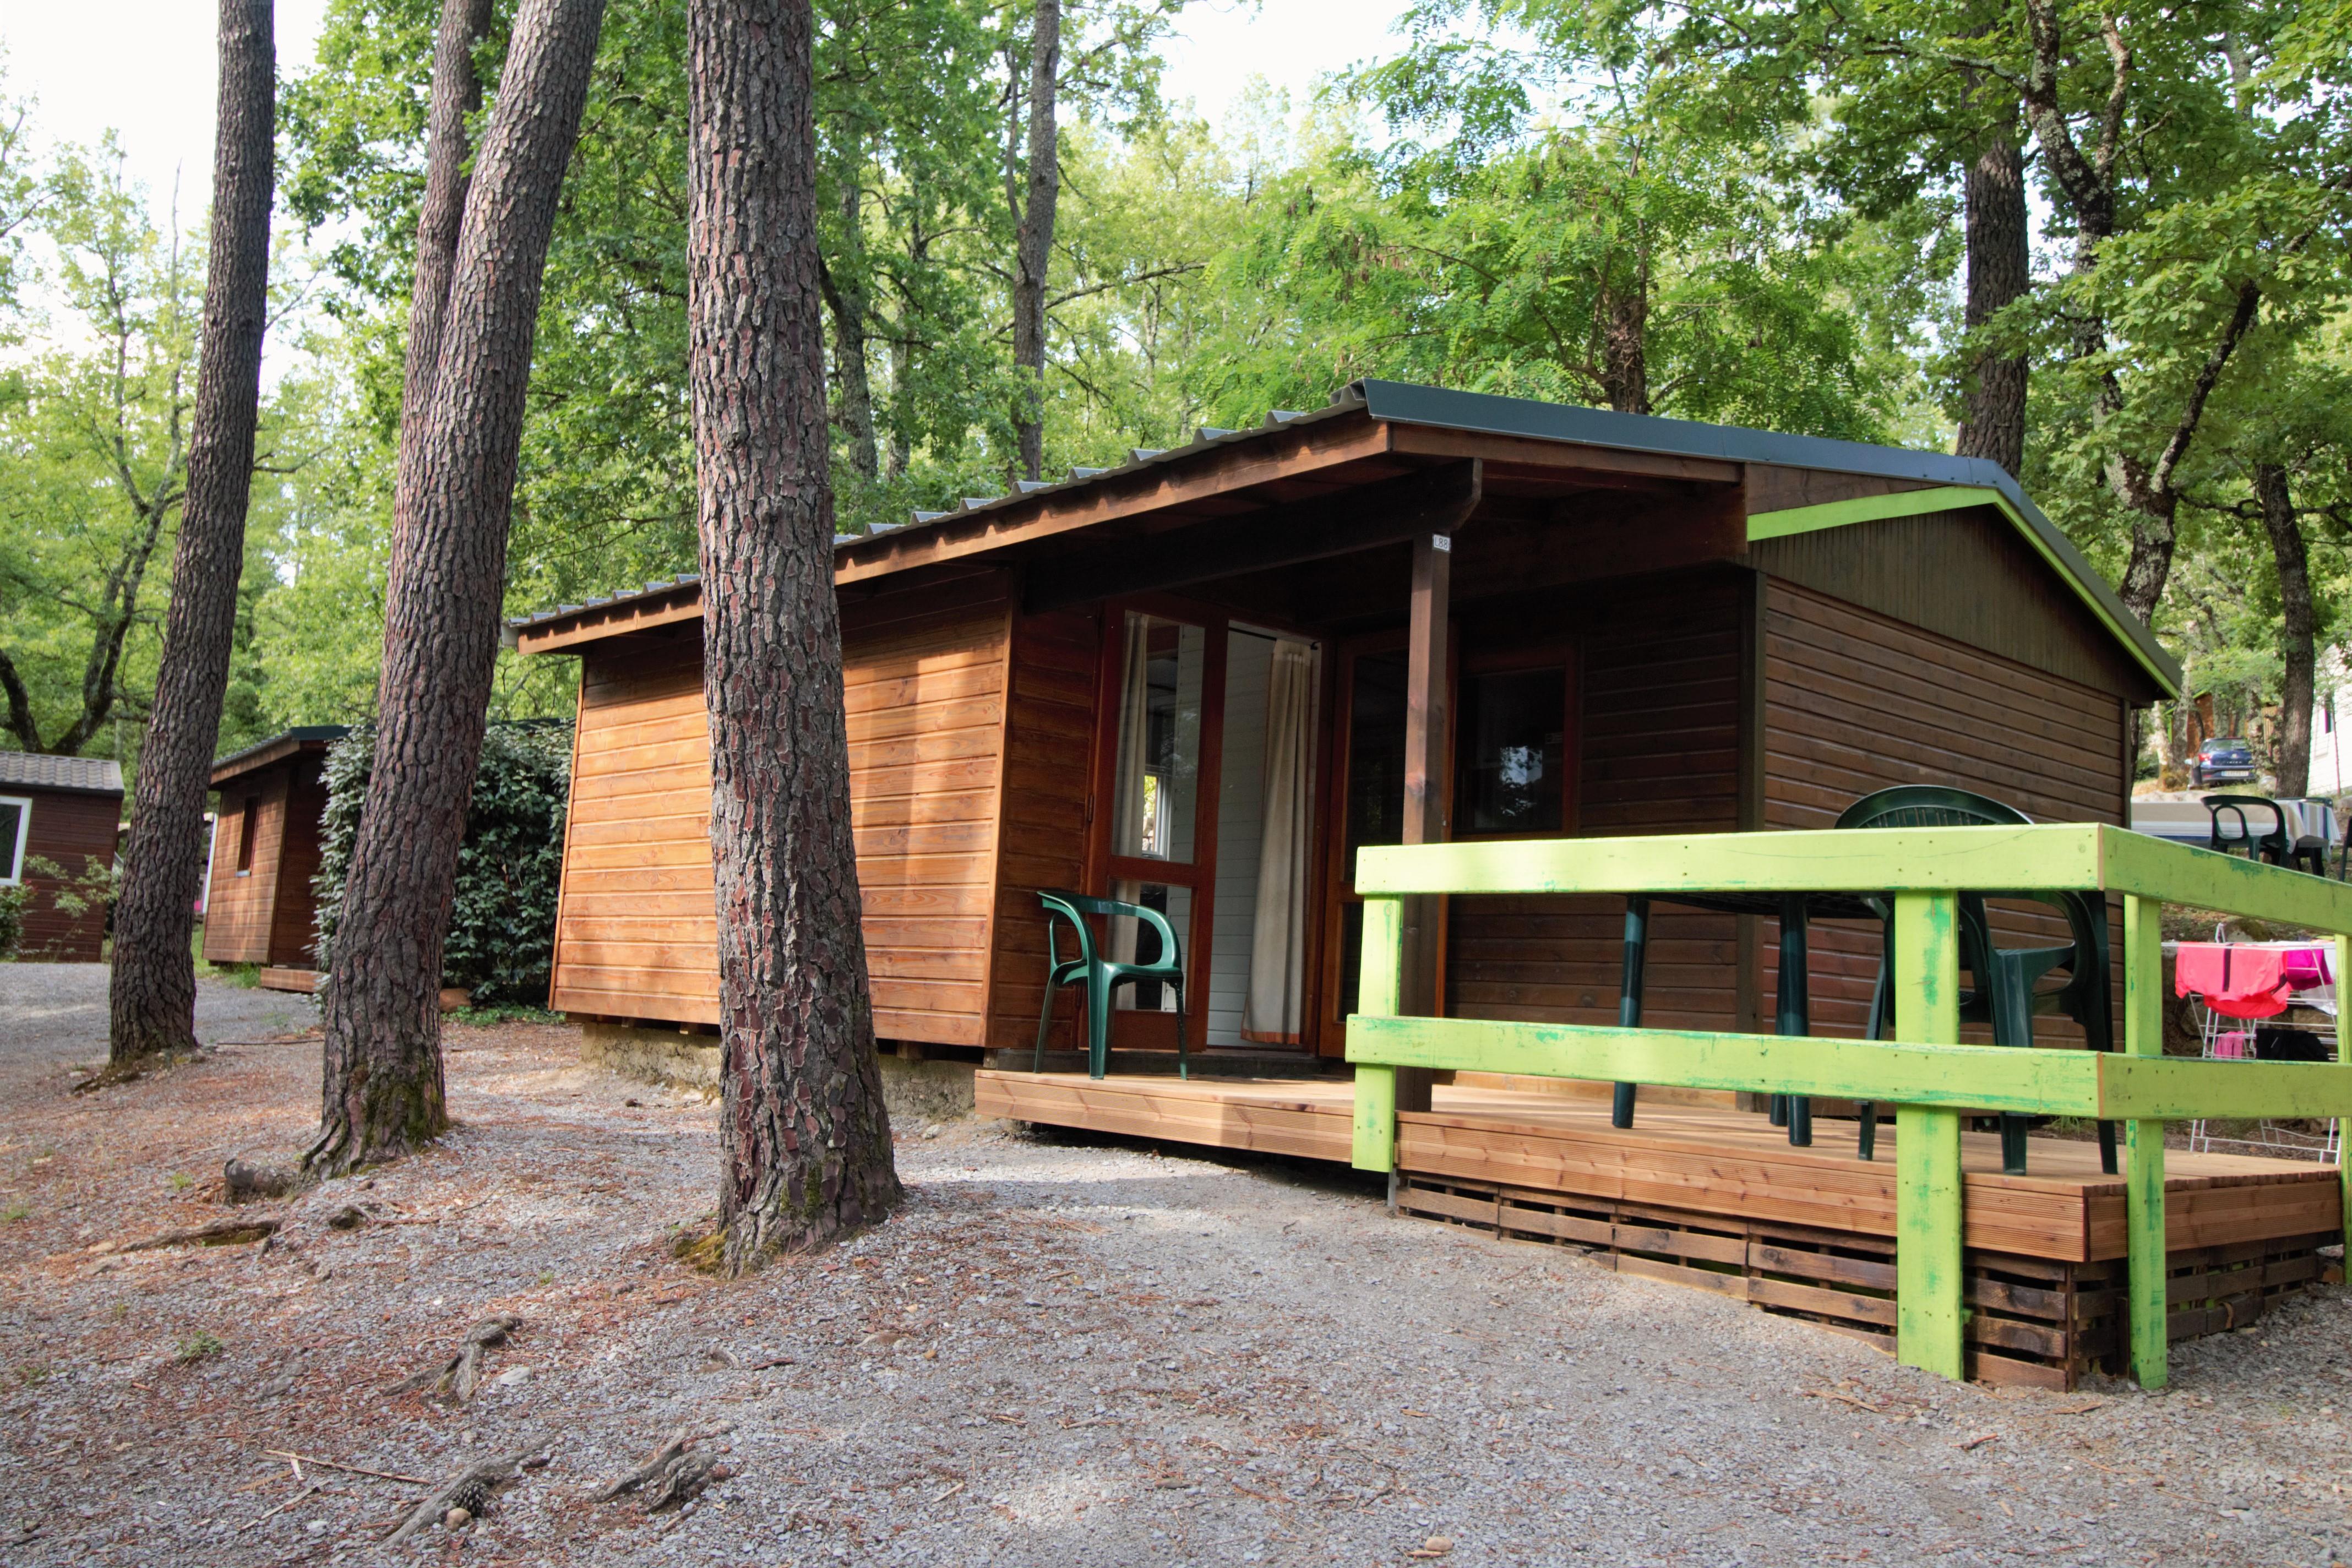 Huuraccommodatie - Chalet Les Blaches - Camping les Blaches Locations